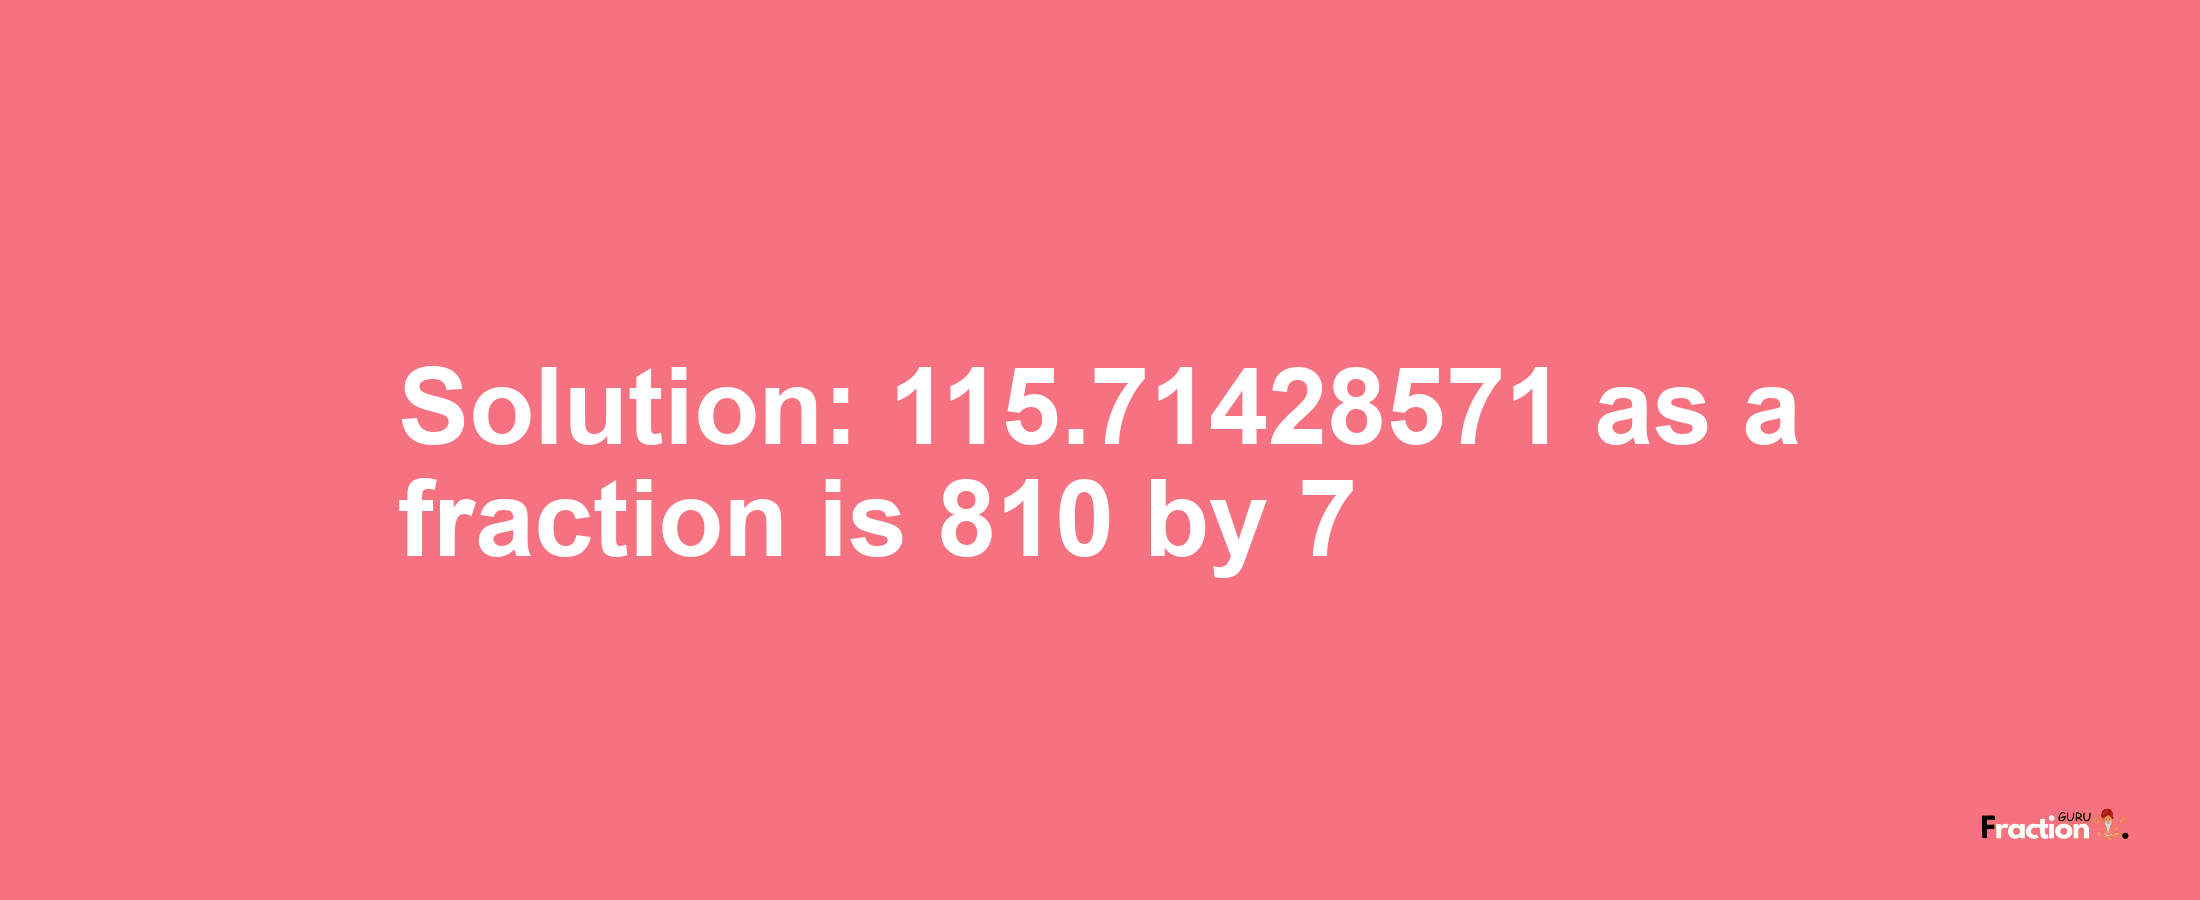 Solution:115.71428571 as a fraction is 810/7